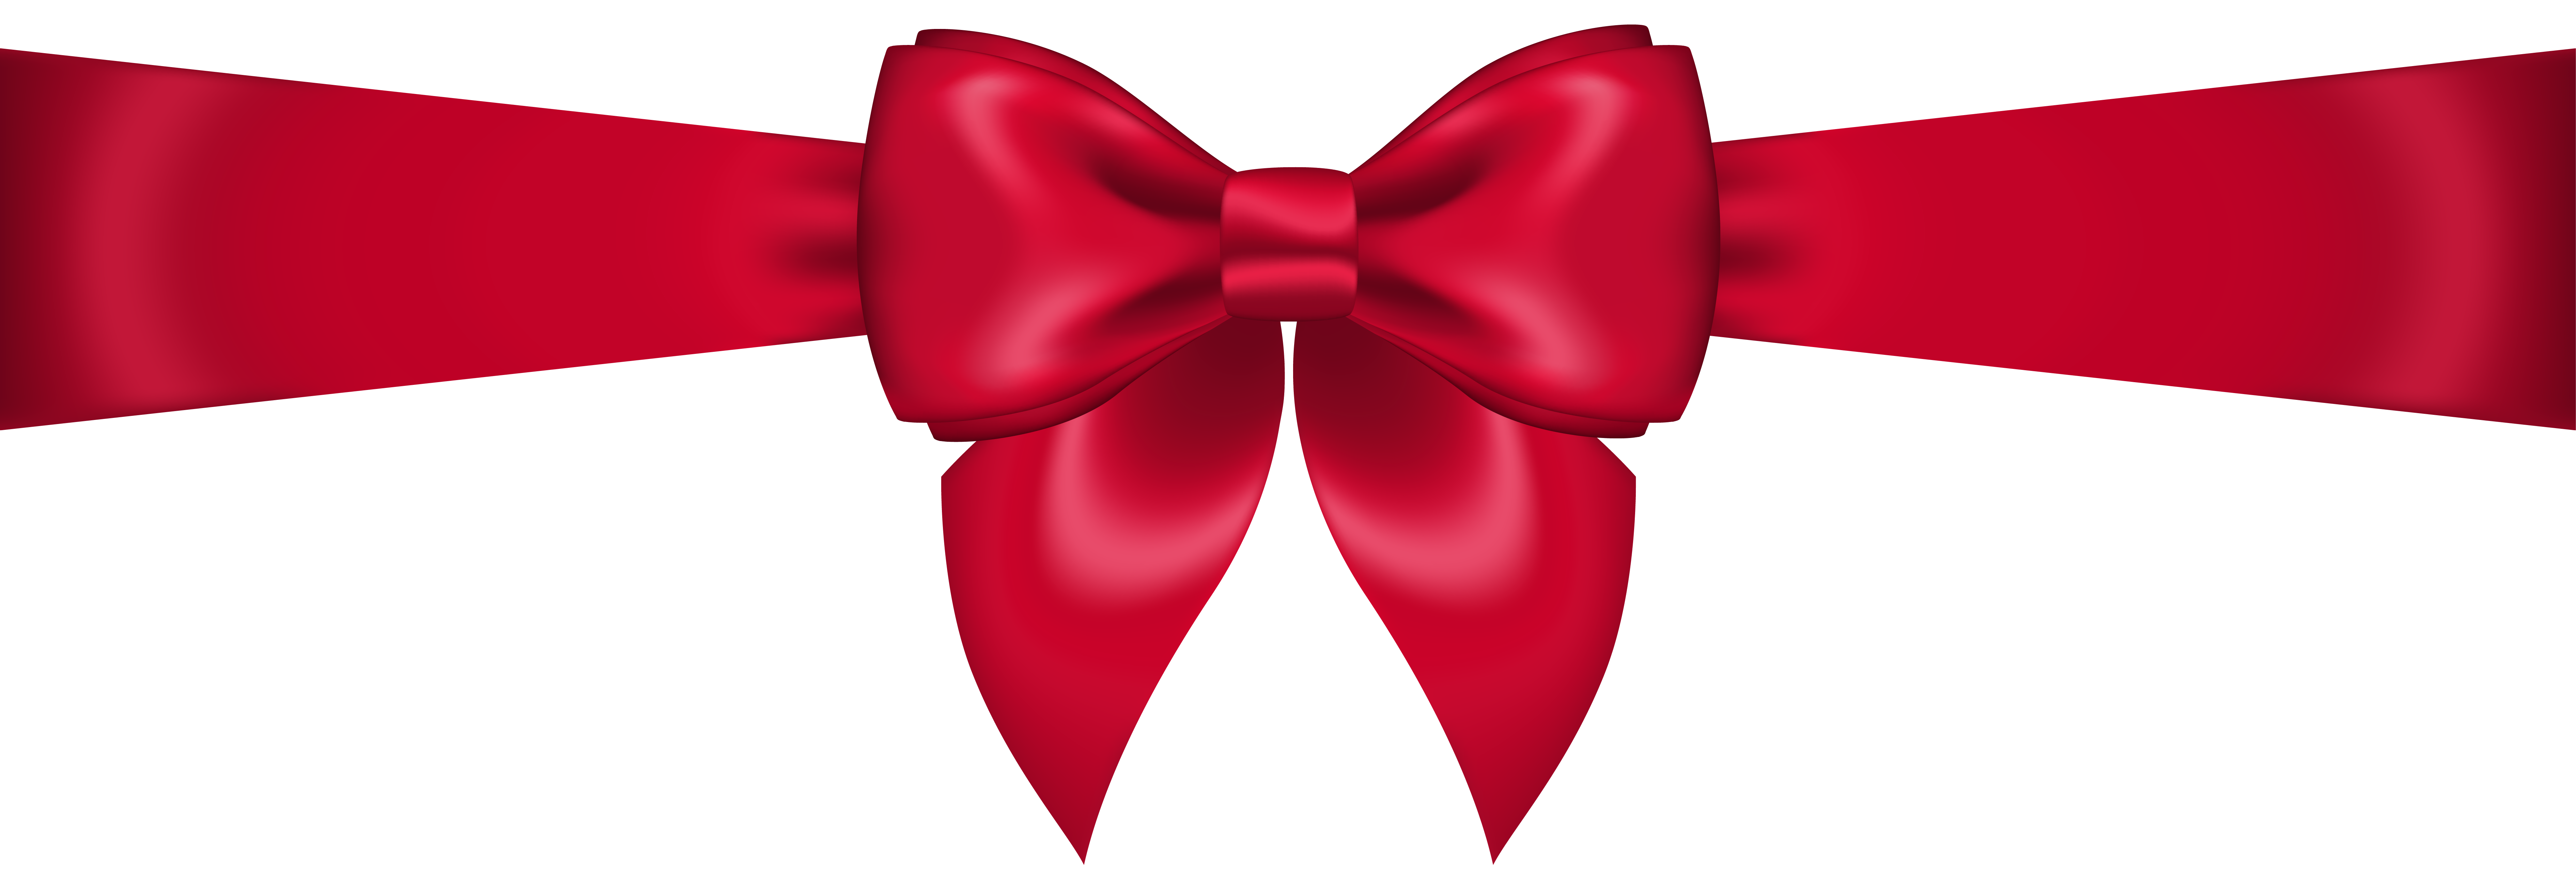 Christmas red bow.